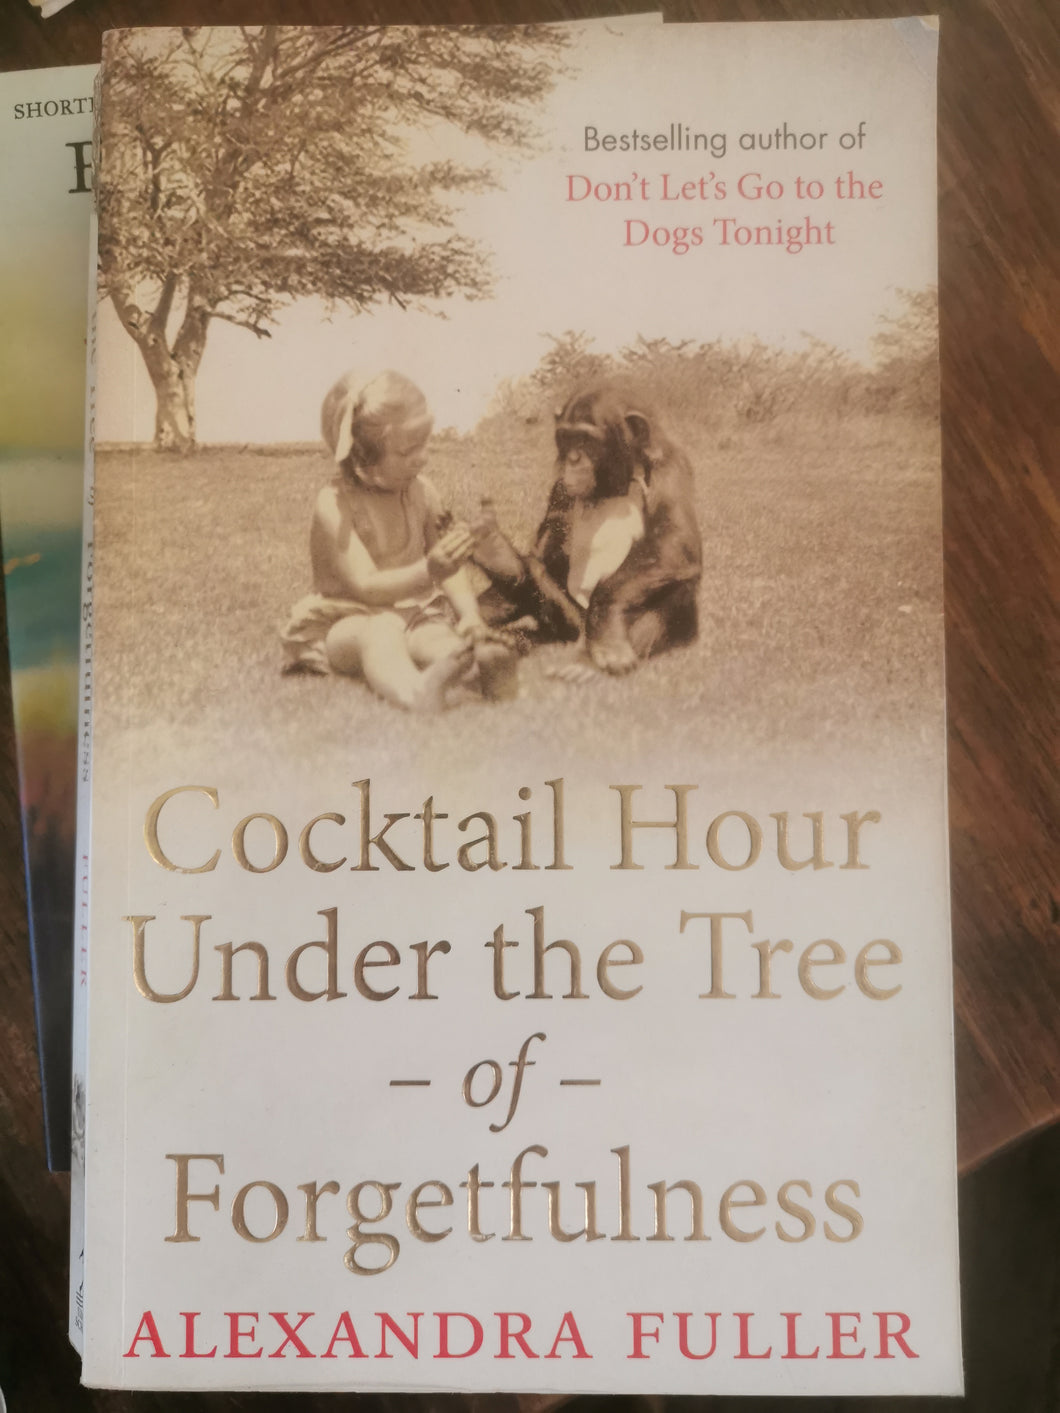 Alexandra Fuller - Cocktail Hour under the Tree of Forgetfulness